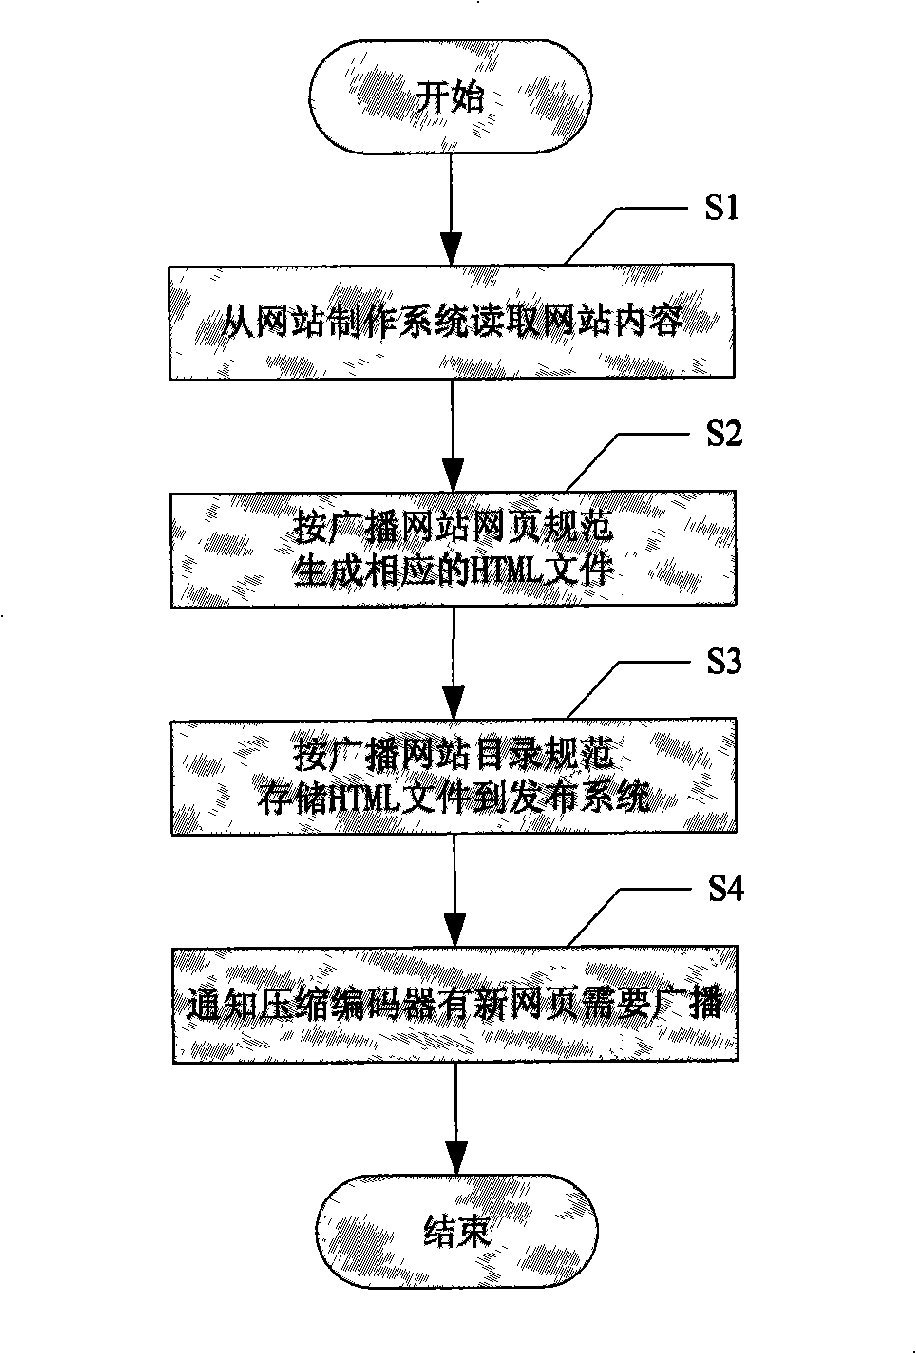 Method and apparatus for implementing digital broadcast network station based on file type transmission mode